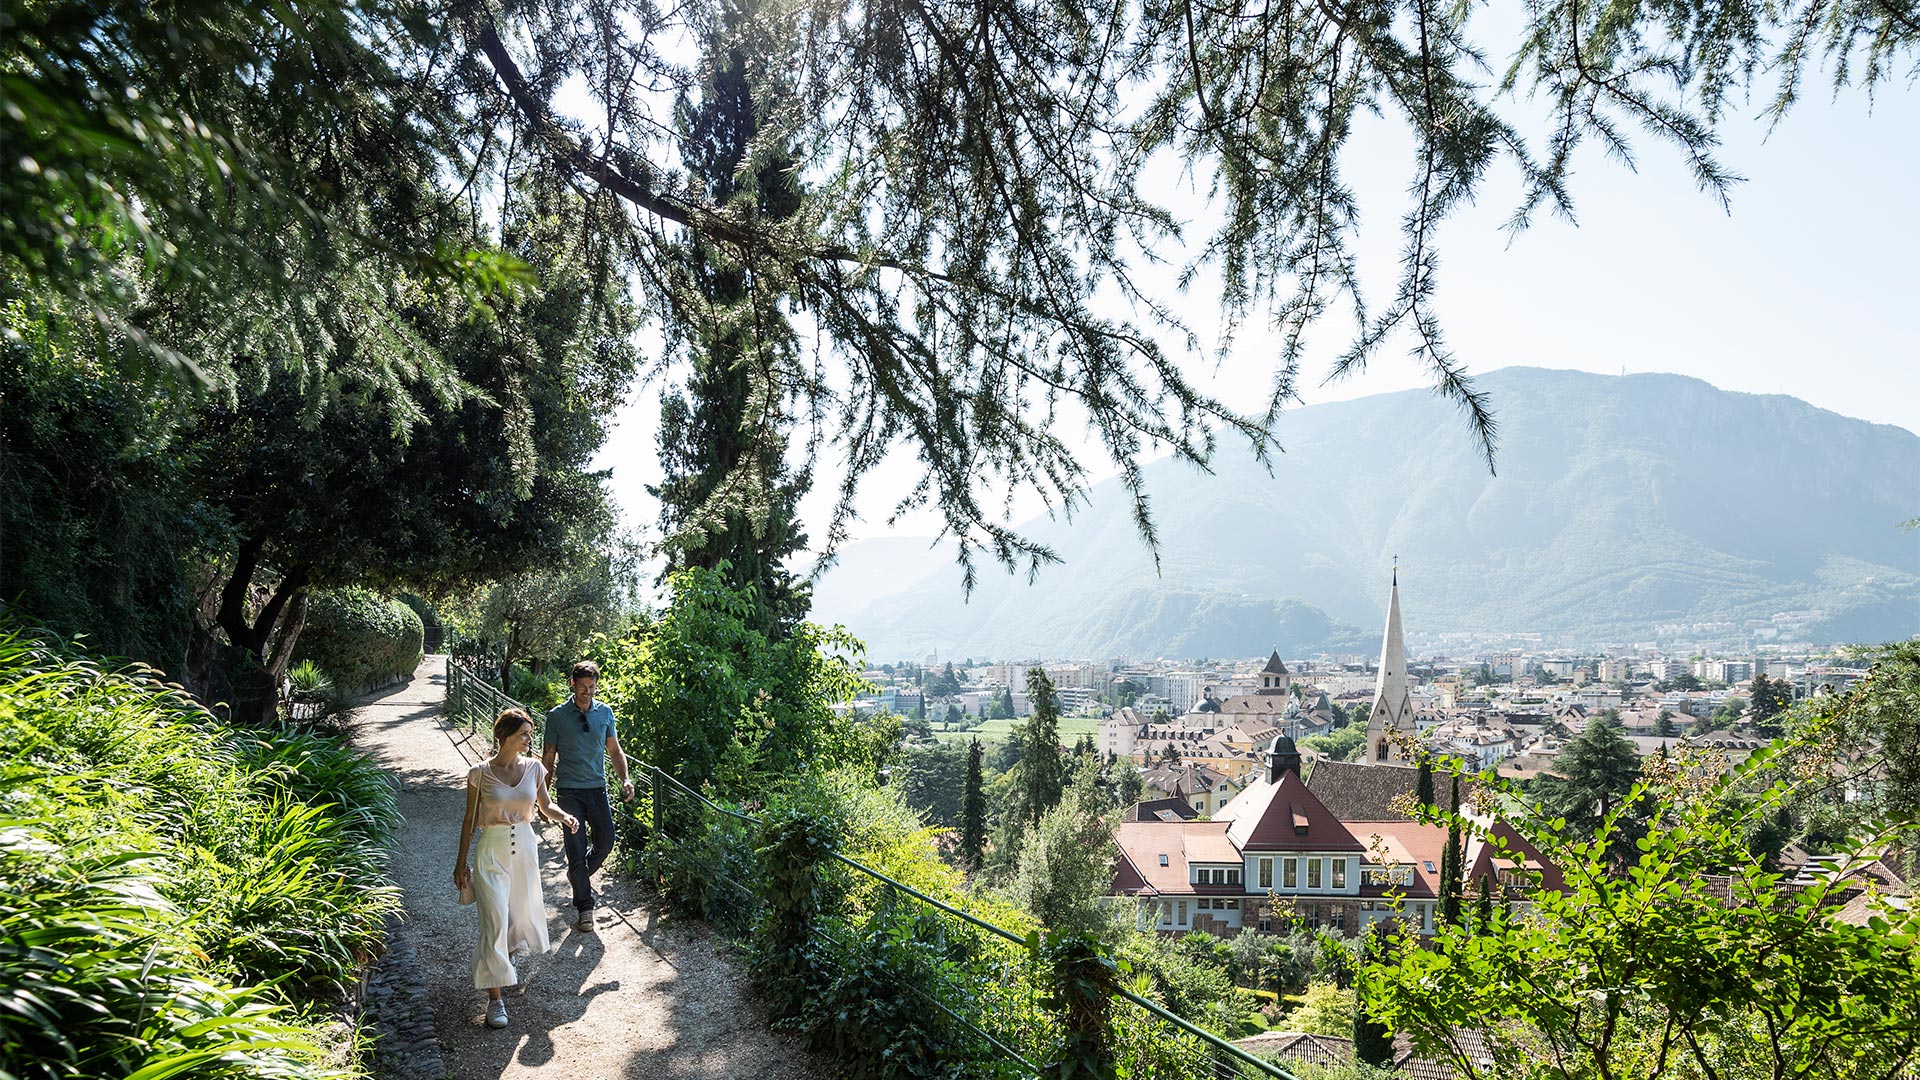 On a beautiful sunny day a couple in love stroll along the Salita di Sant'Osvaldo with a view over the residential area of Bolzano.